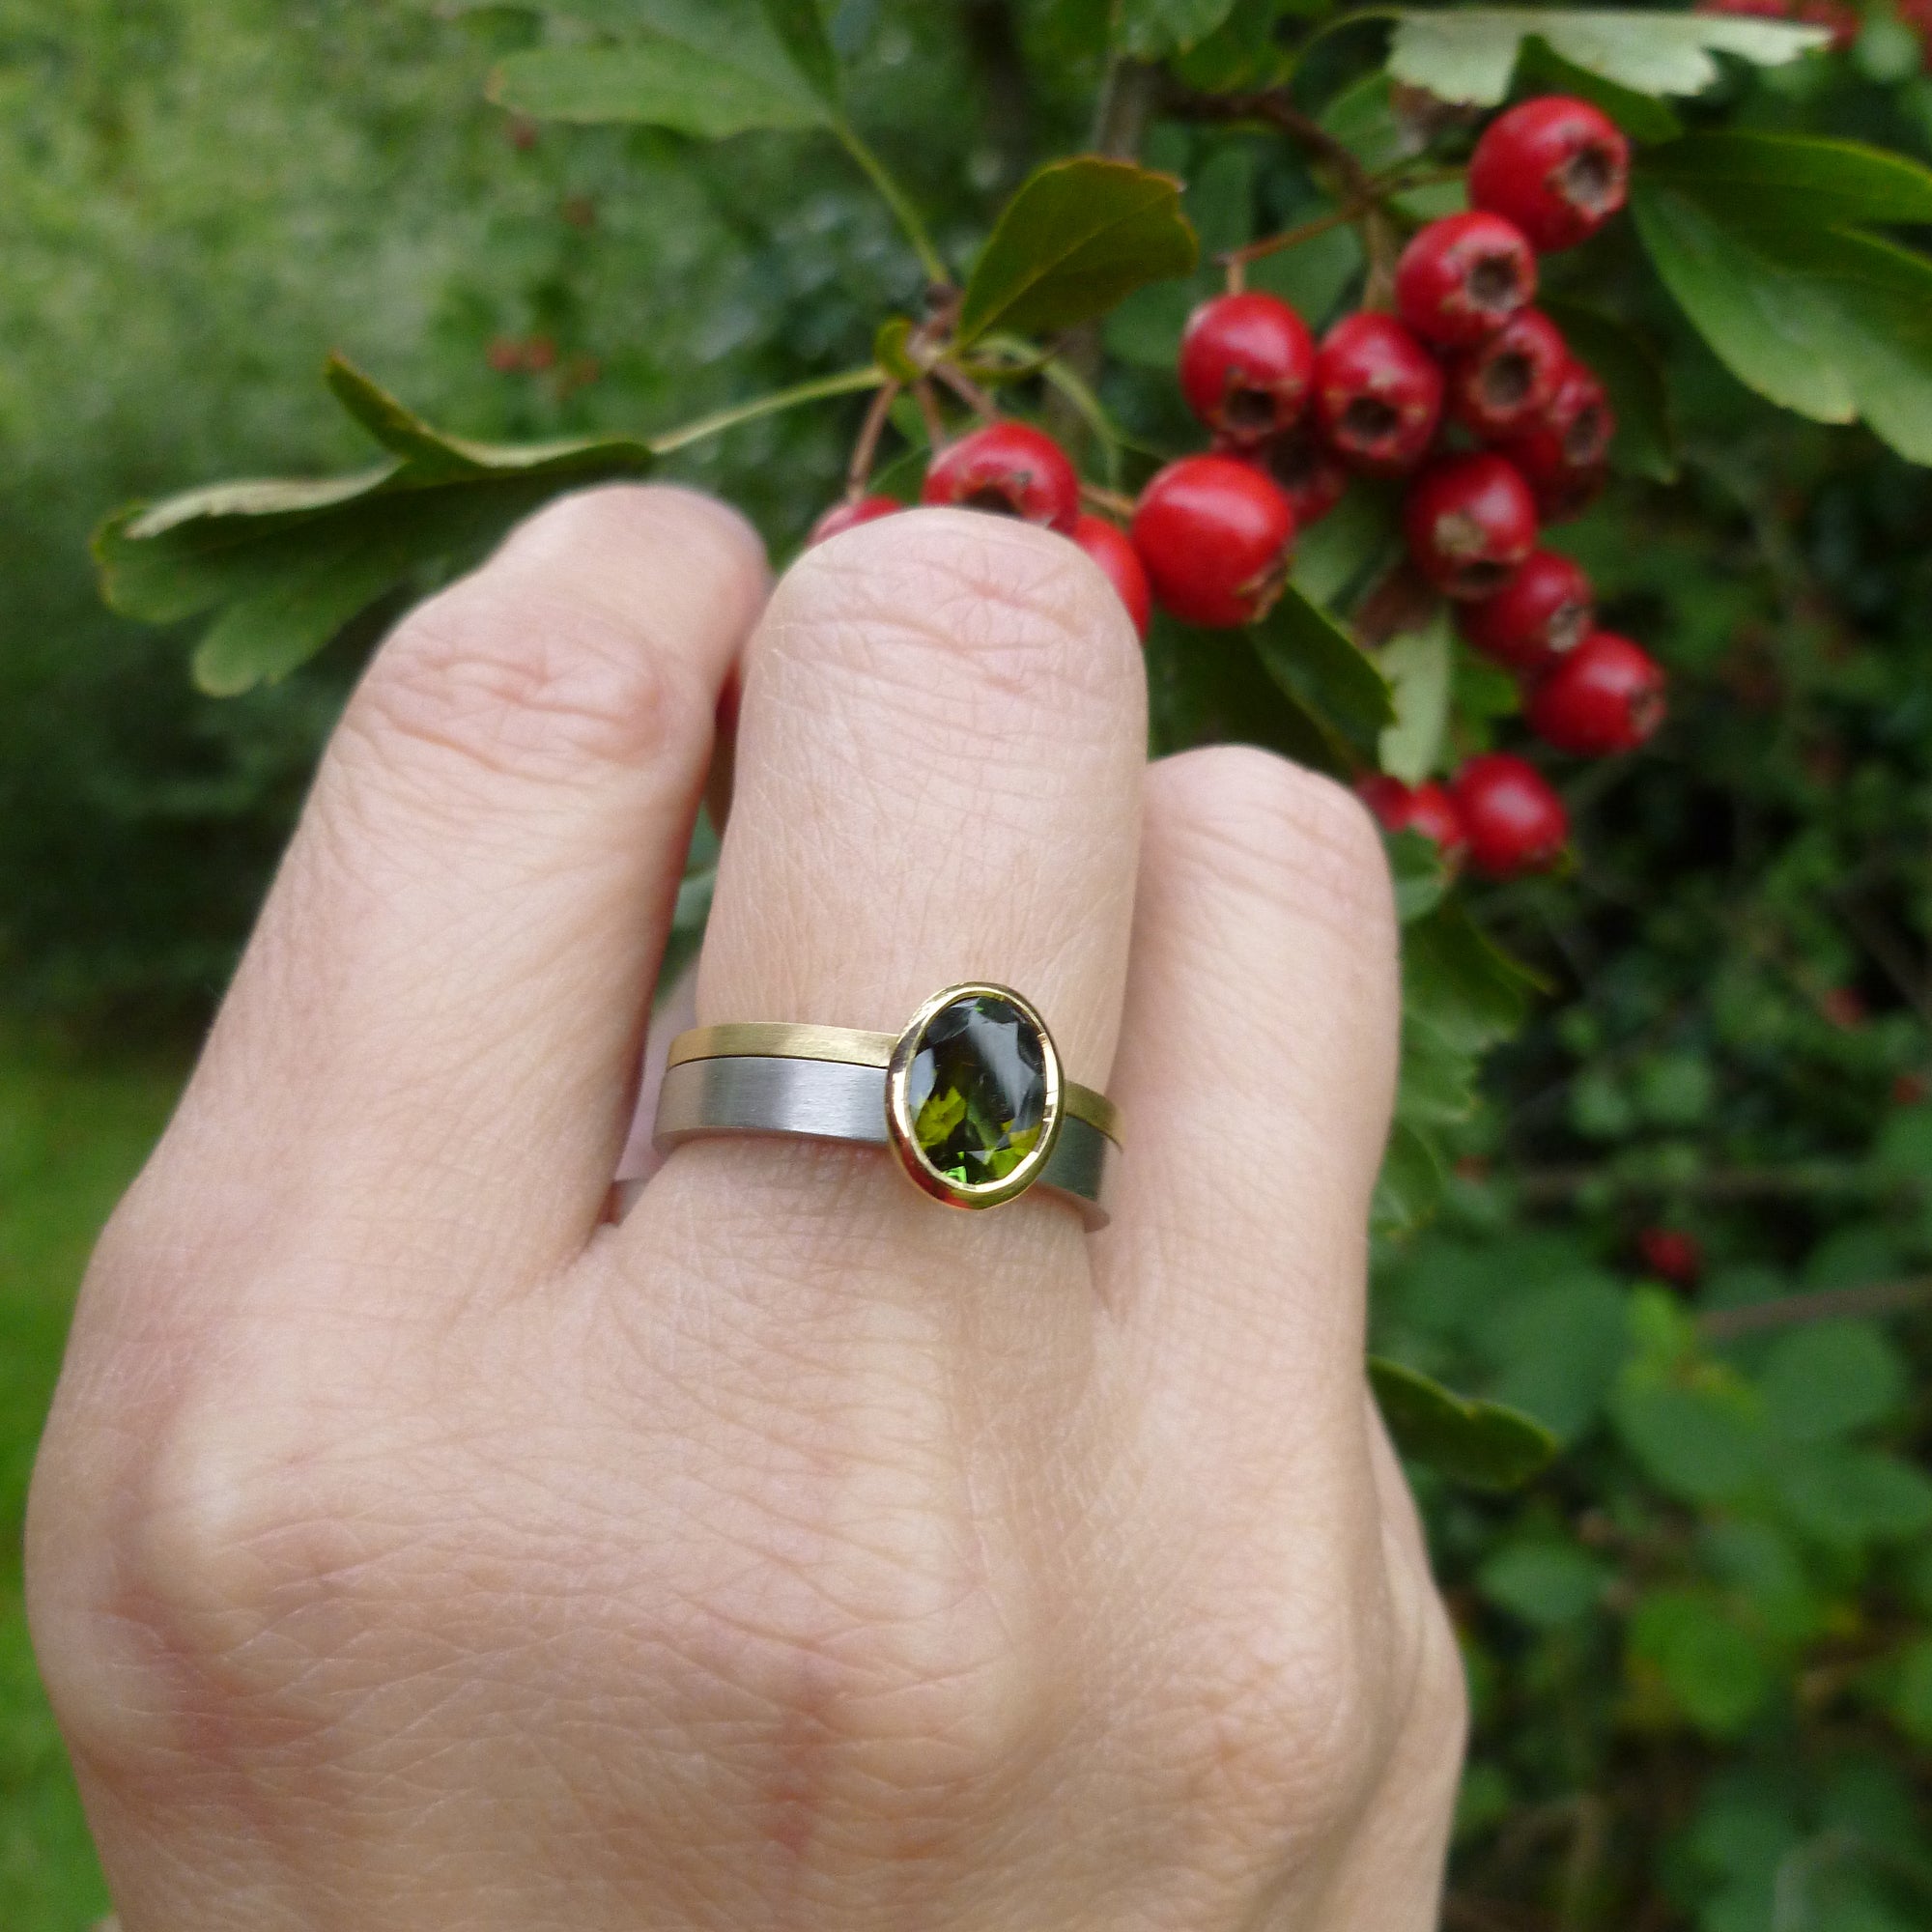 18ct white and yellow gold stacking ring with bottle green tourmaline